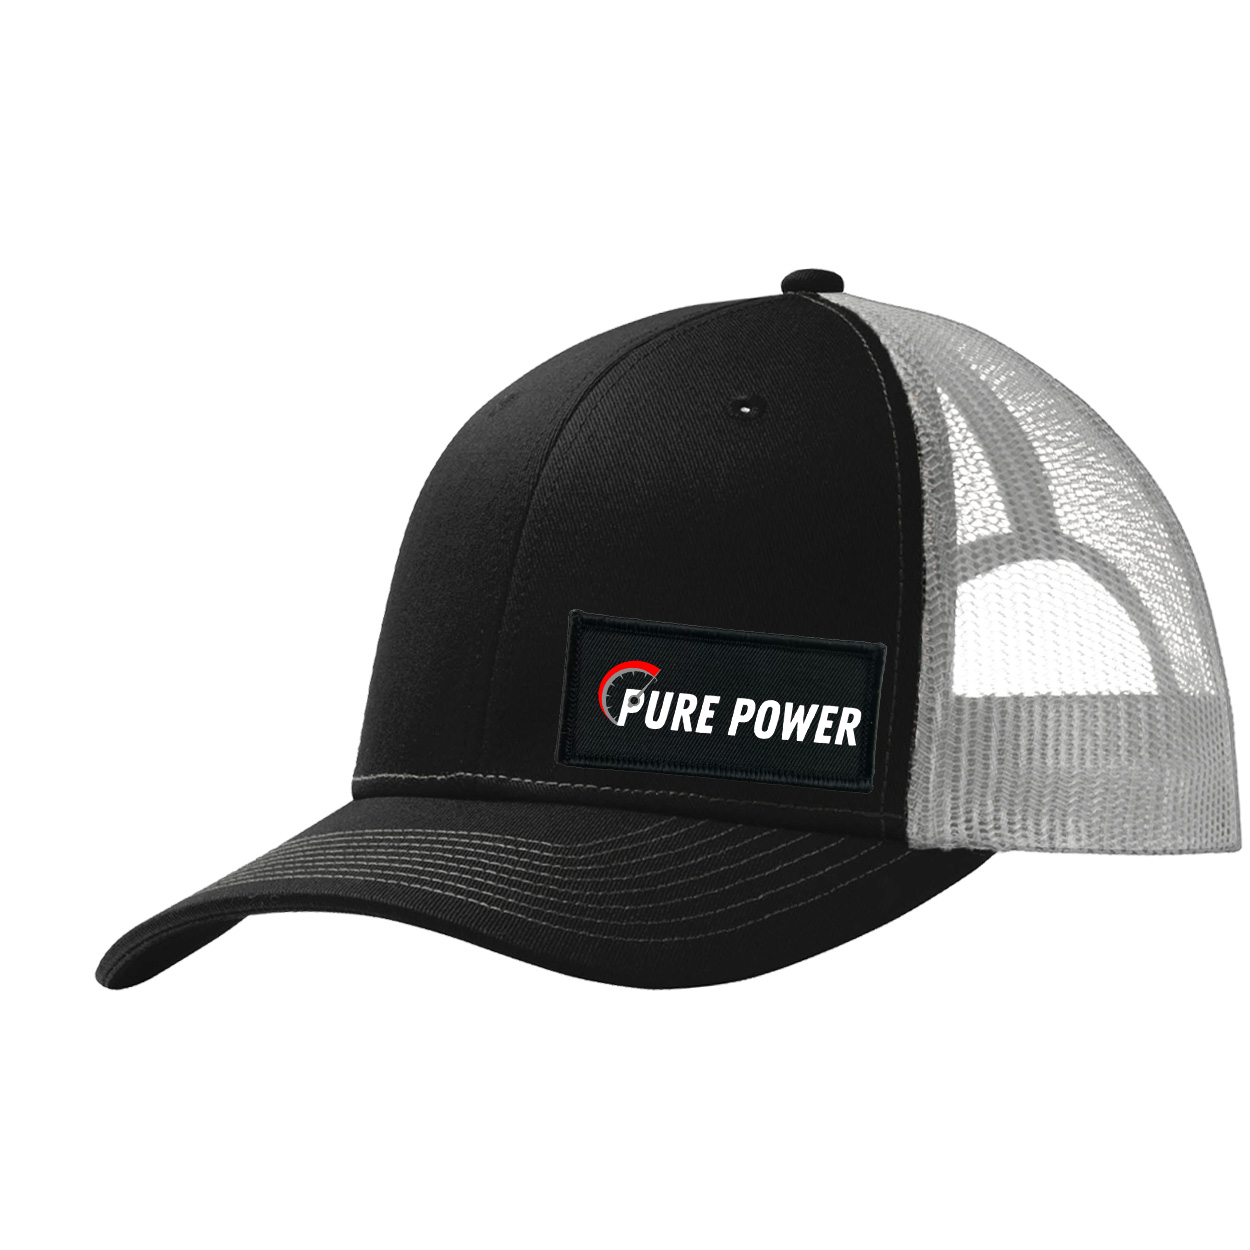 Ride Pure Power Logo Night Out Woven Patch Snapback Trucker Hat Black/Gray